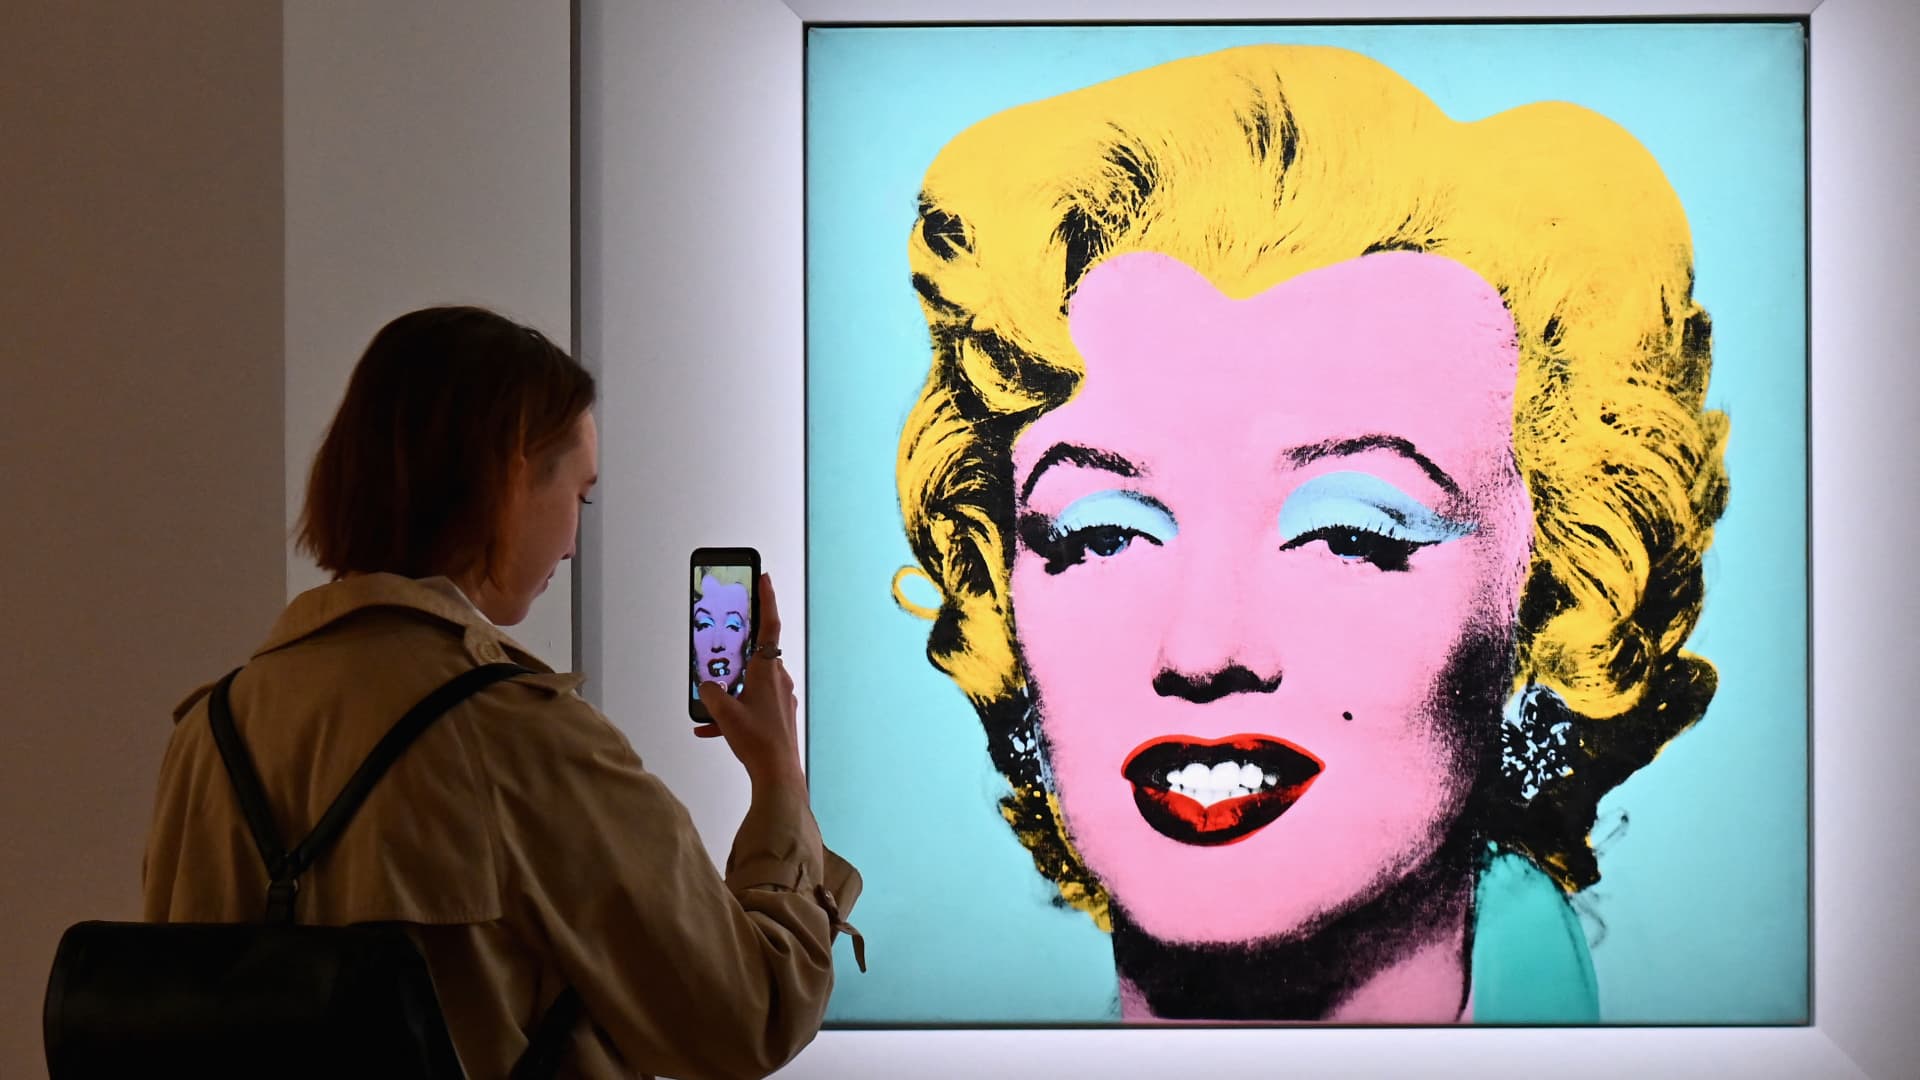 Andy Warhol’s ‘Marilyn’ sells for $195 million, sets American record